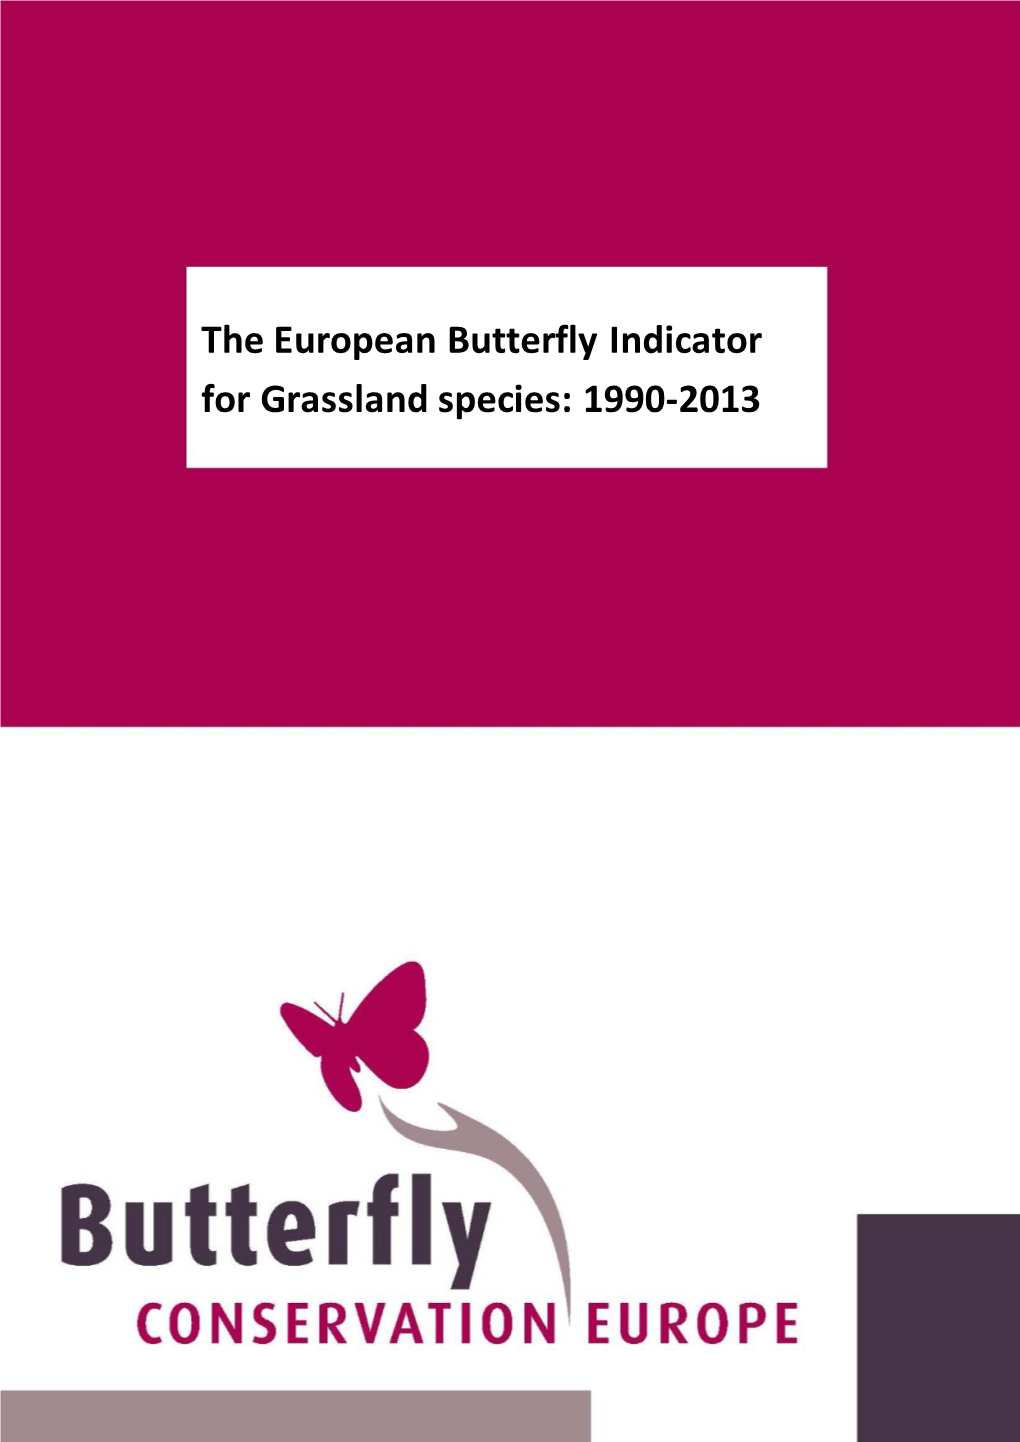 The European Butterfly Indicator for Grassland Species 1990-2013